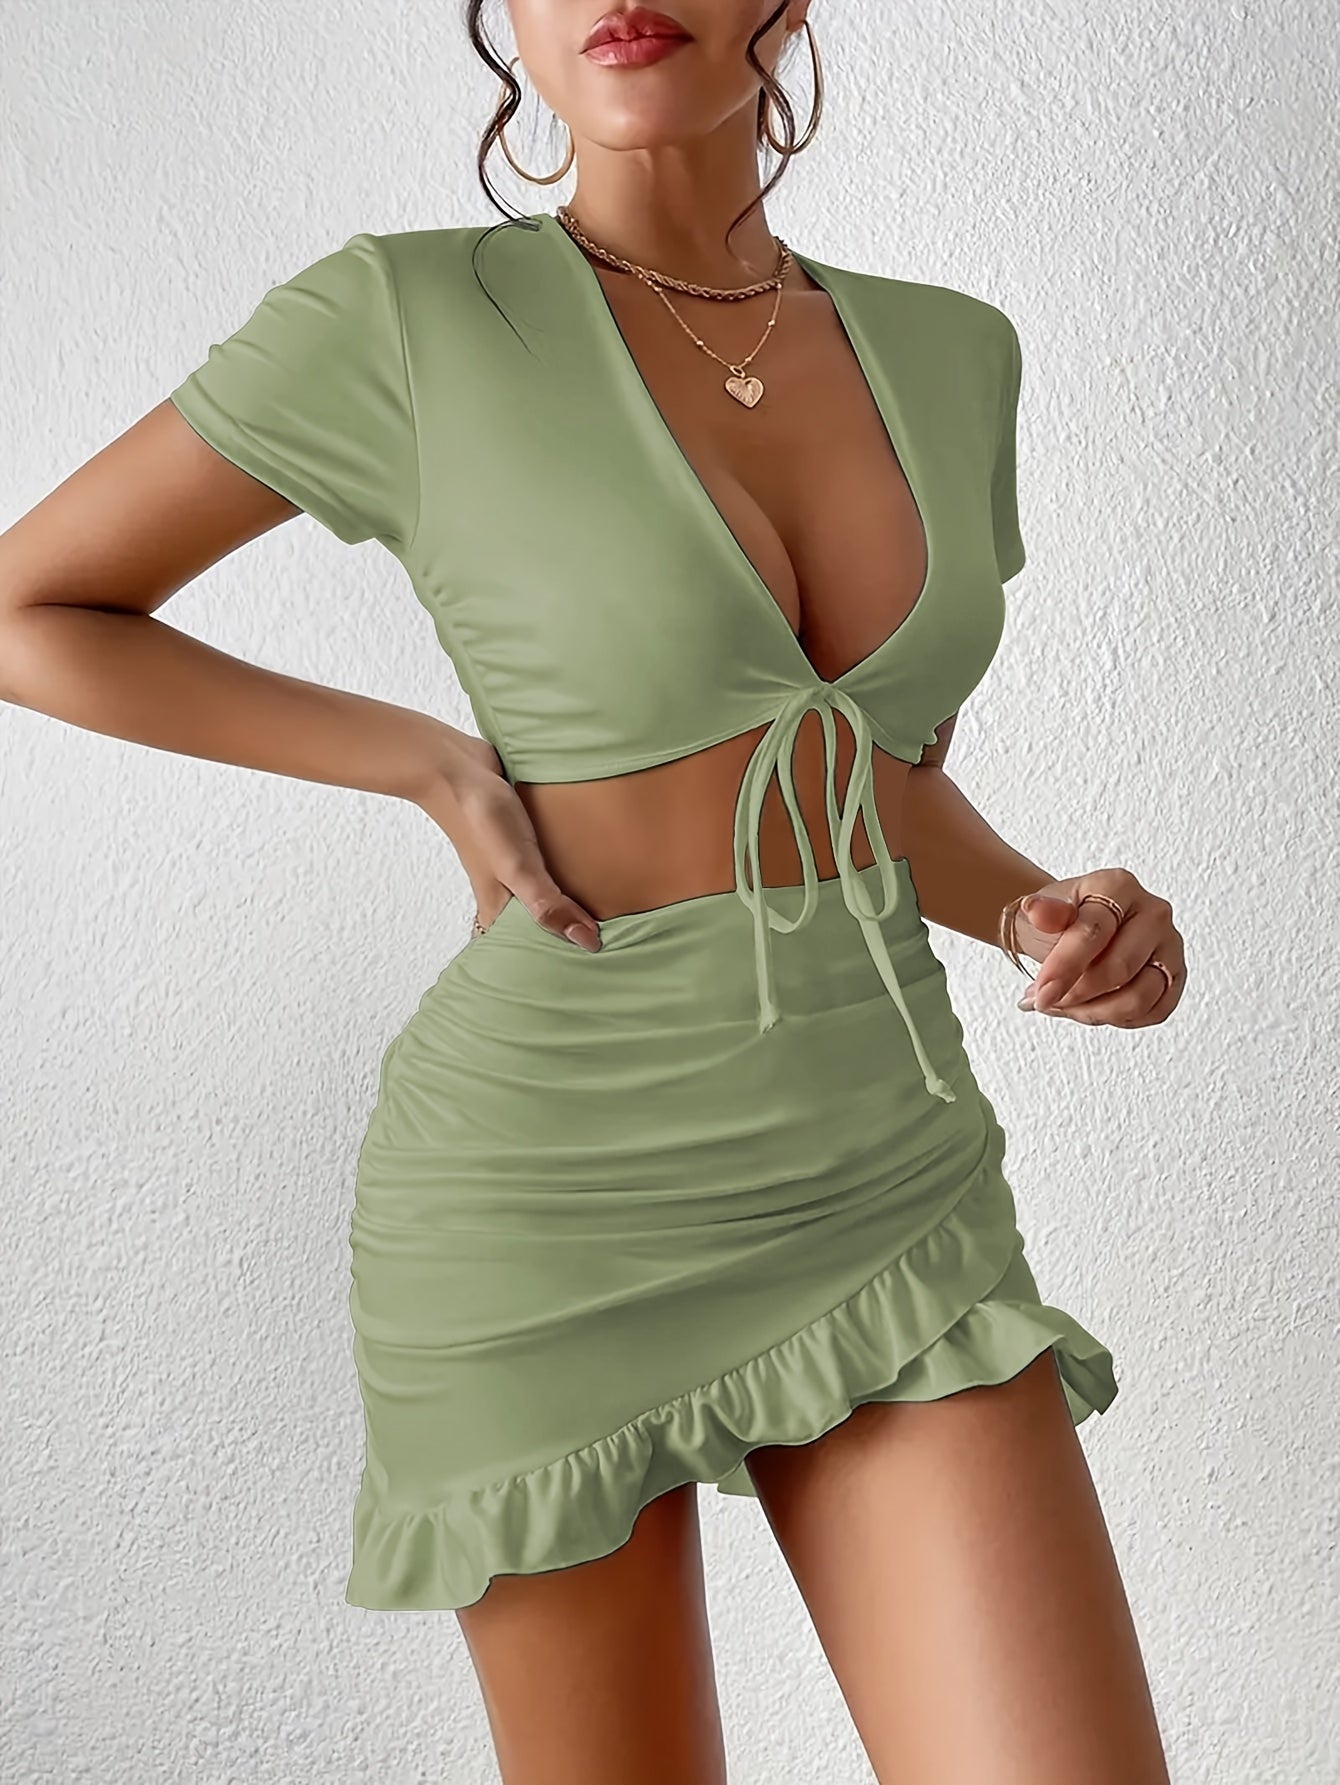 Antmvs Casual Matching Two-piece Skirt Set, Tie Front Crop Top & Ruffle Hem Ruched Skirt Outfits, Women's Clothing